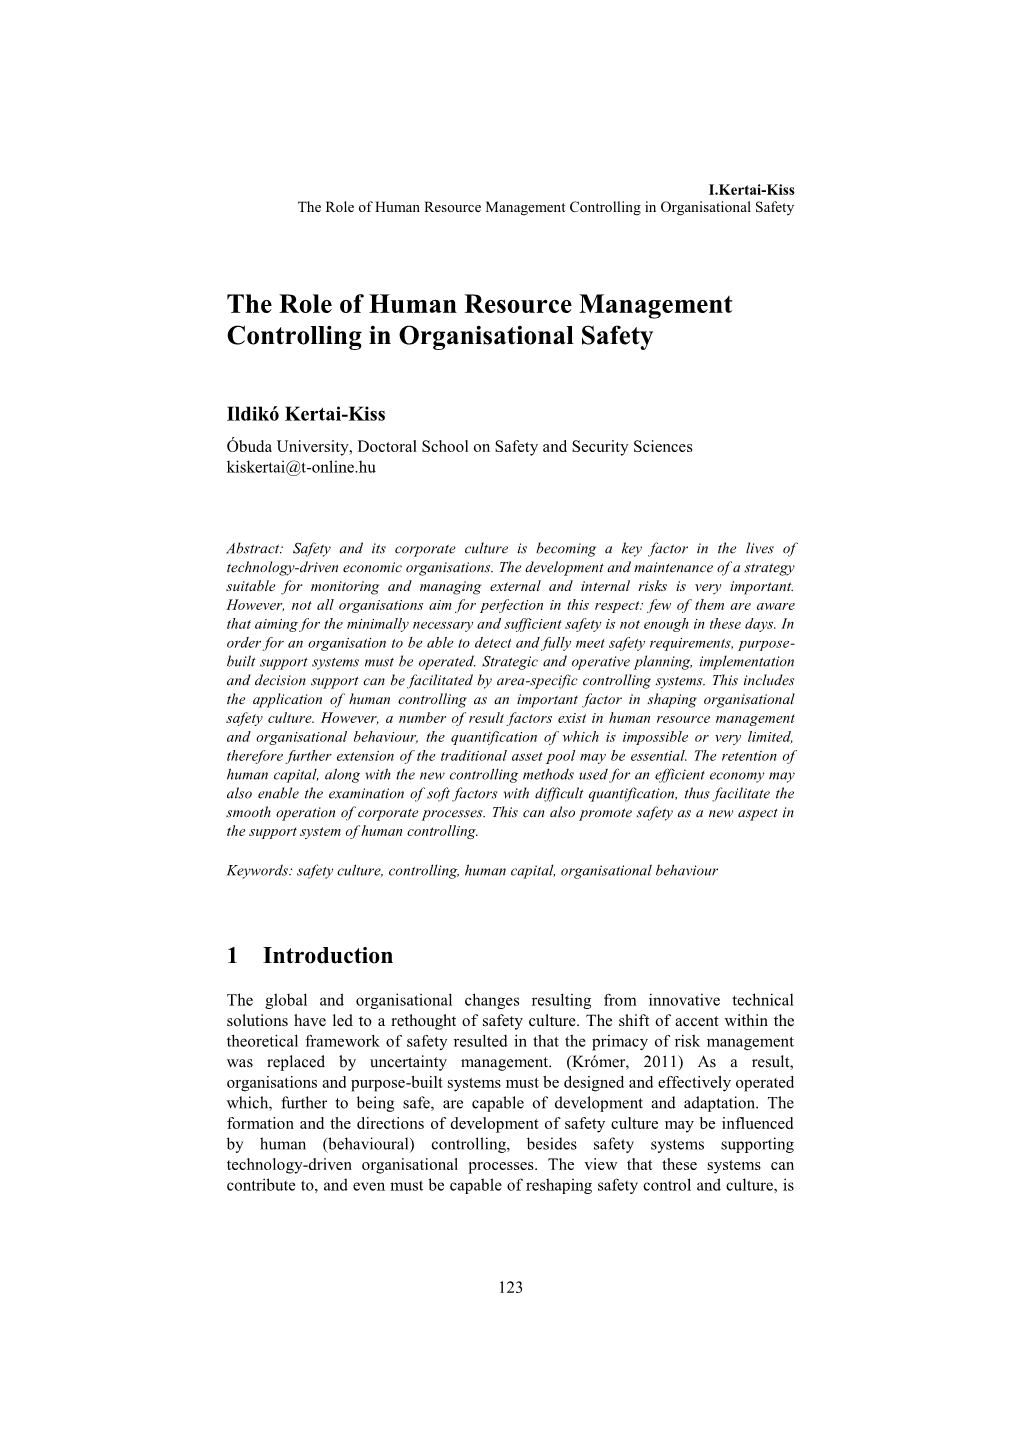 The Role of Human Resource Management Controlling in Organisational Safety